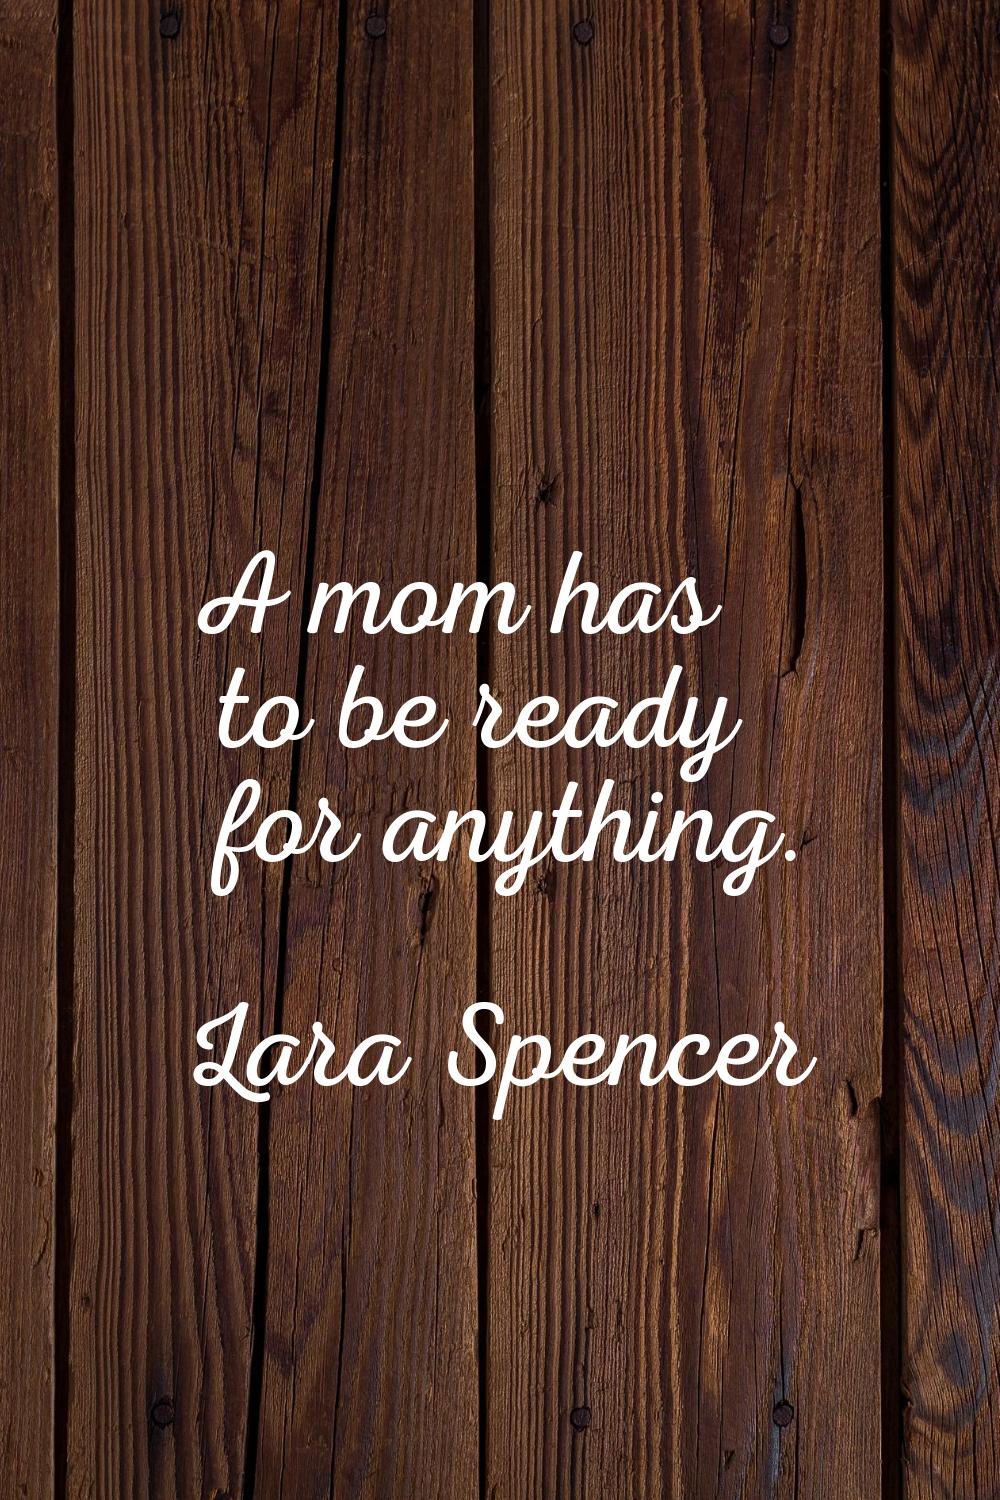 A mom has to be ready for anything.